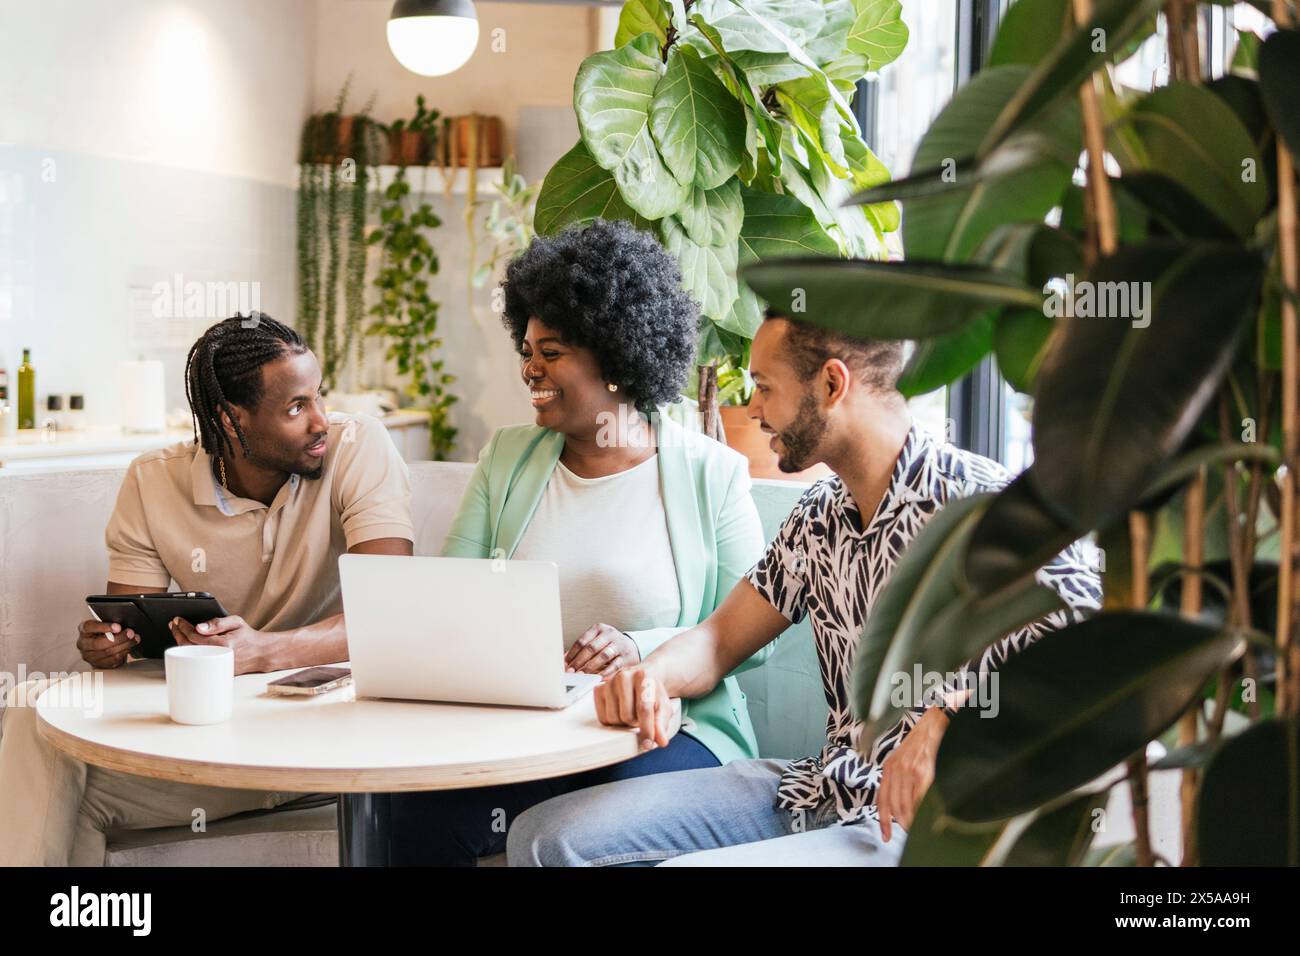 Three professionals collaborate around a laptop in a modern, plant-filled coworking environment, exchanging ideas and enjoying a friendly conversation Stock Photo